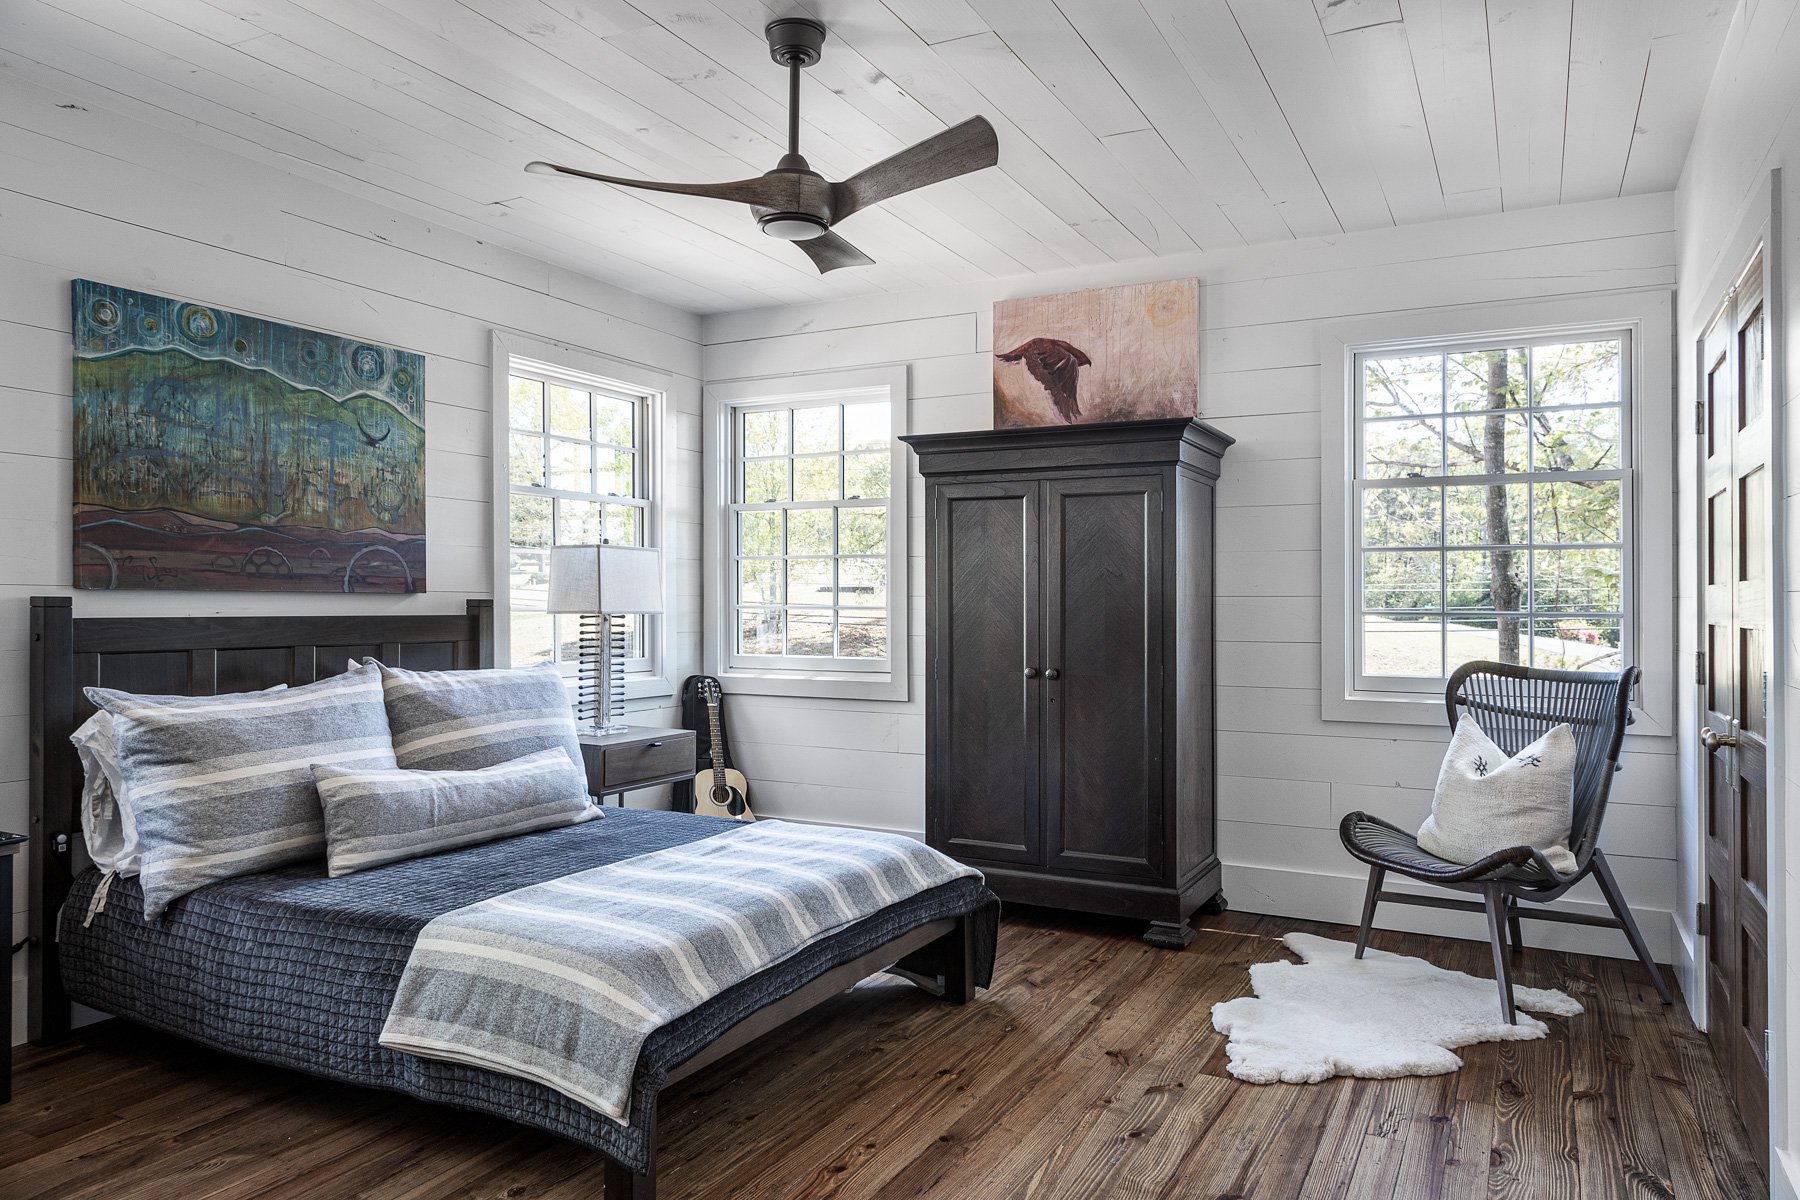 Spacious bedroom with artistic decor, hardwood floors, and a ceiling fan.